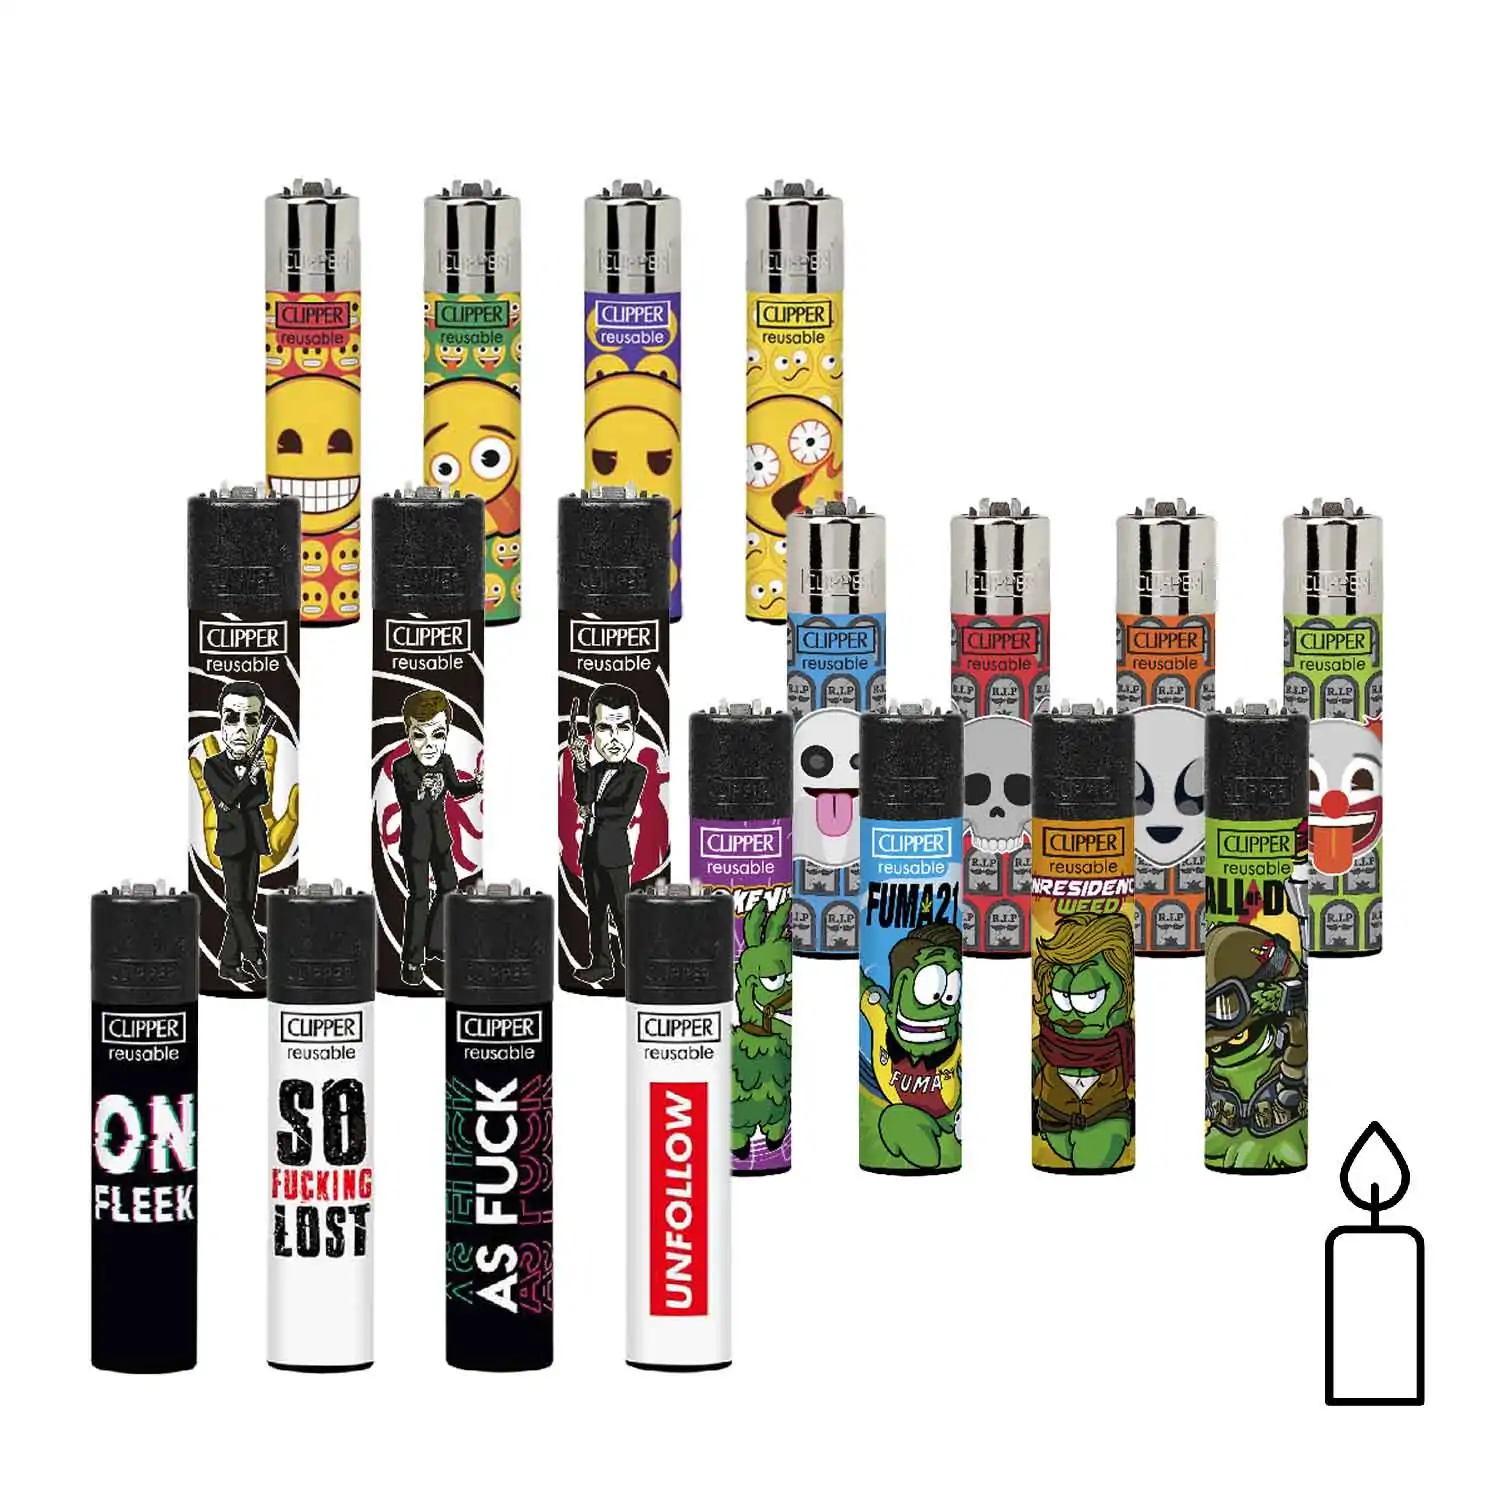 Clipper lighter - Buy at Real Tobacco